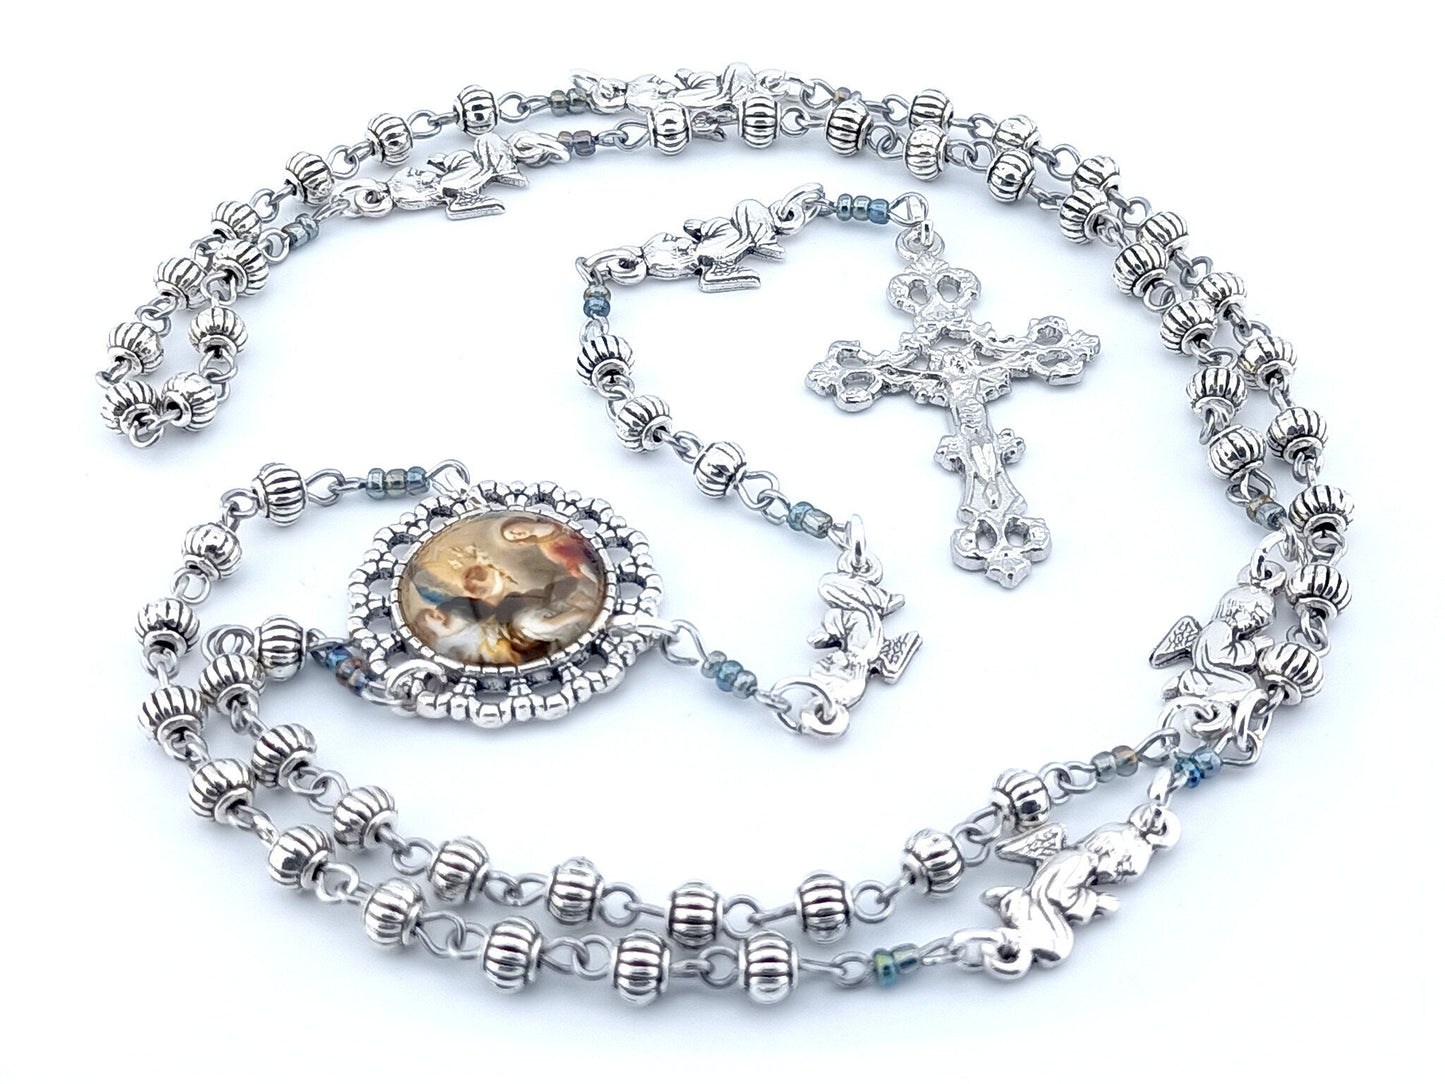 The Annunciation unique rosary beads with Tibetan silver beads, silver angel pater beads, crucifix and picture centre medal.